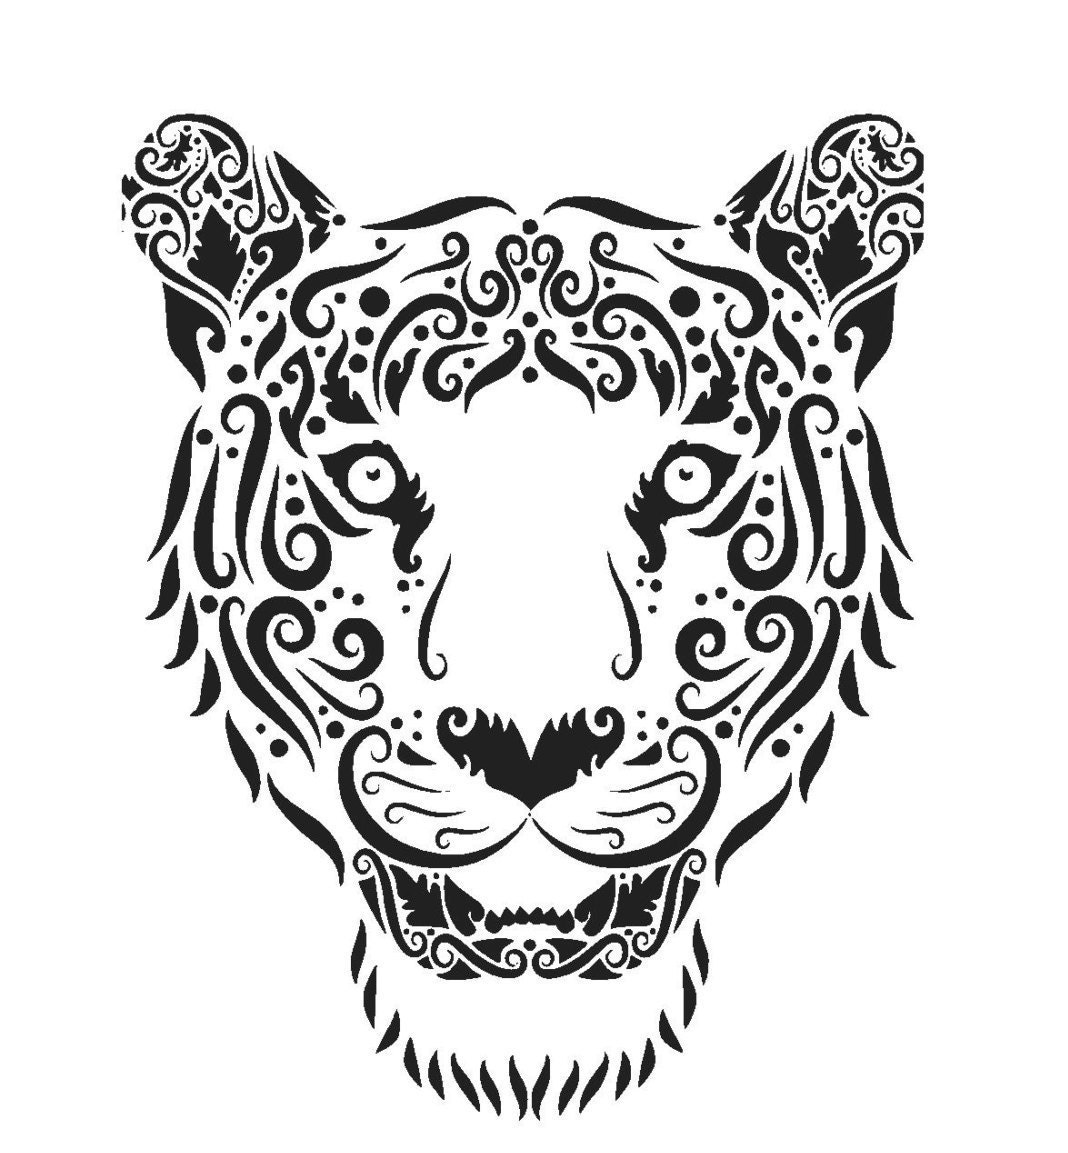 Download Auburn Tiger Silhouette or SVG Instant Download Cut File